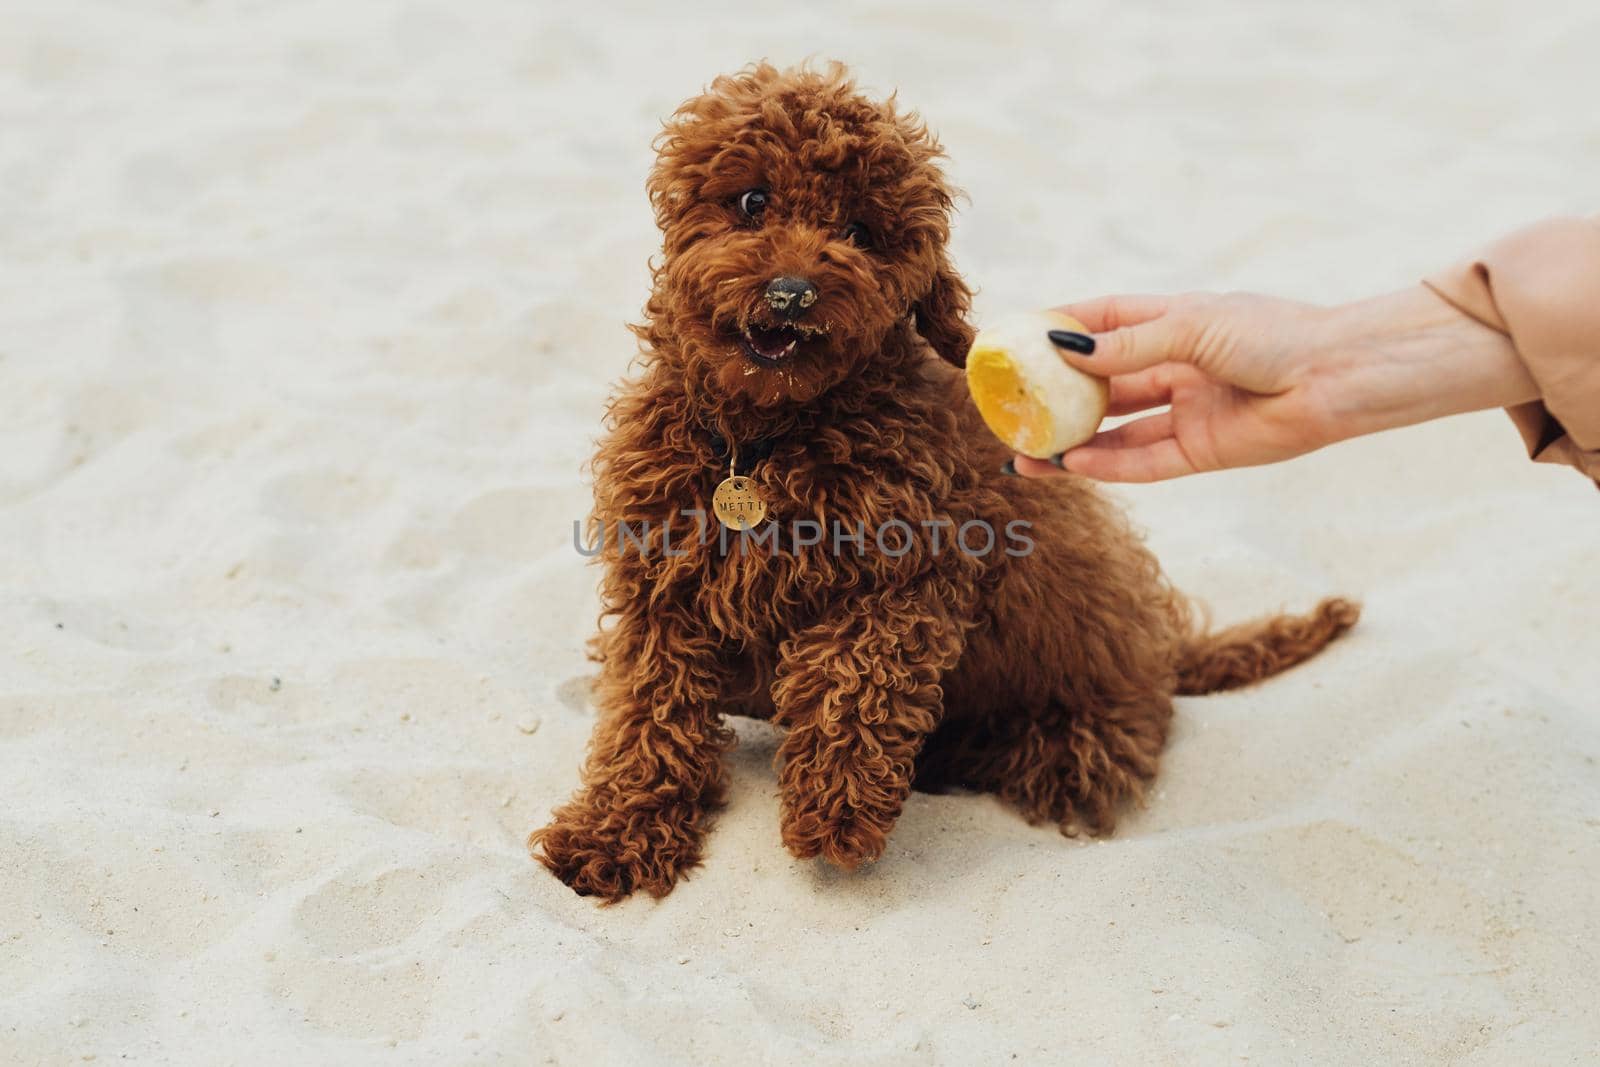 Playful Small Redhead Dog Playing Outdoors, Breed Toy Poodle Called Metti Having Fun with Owner by Romvy